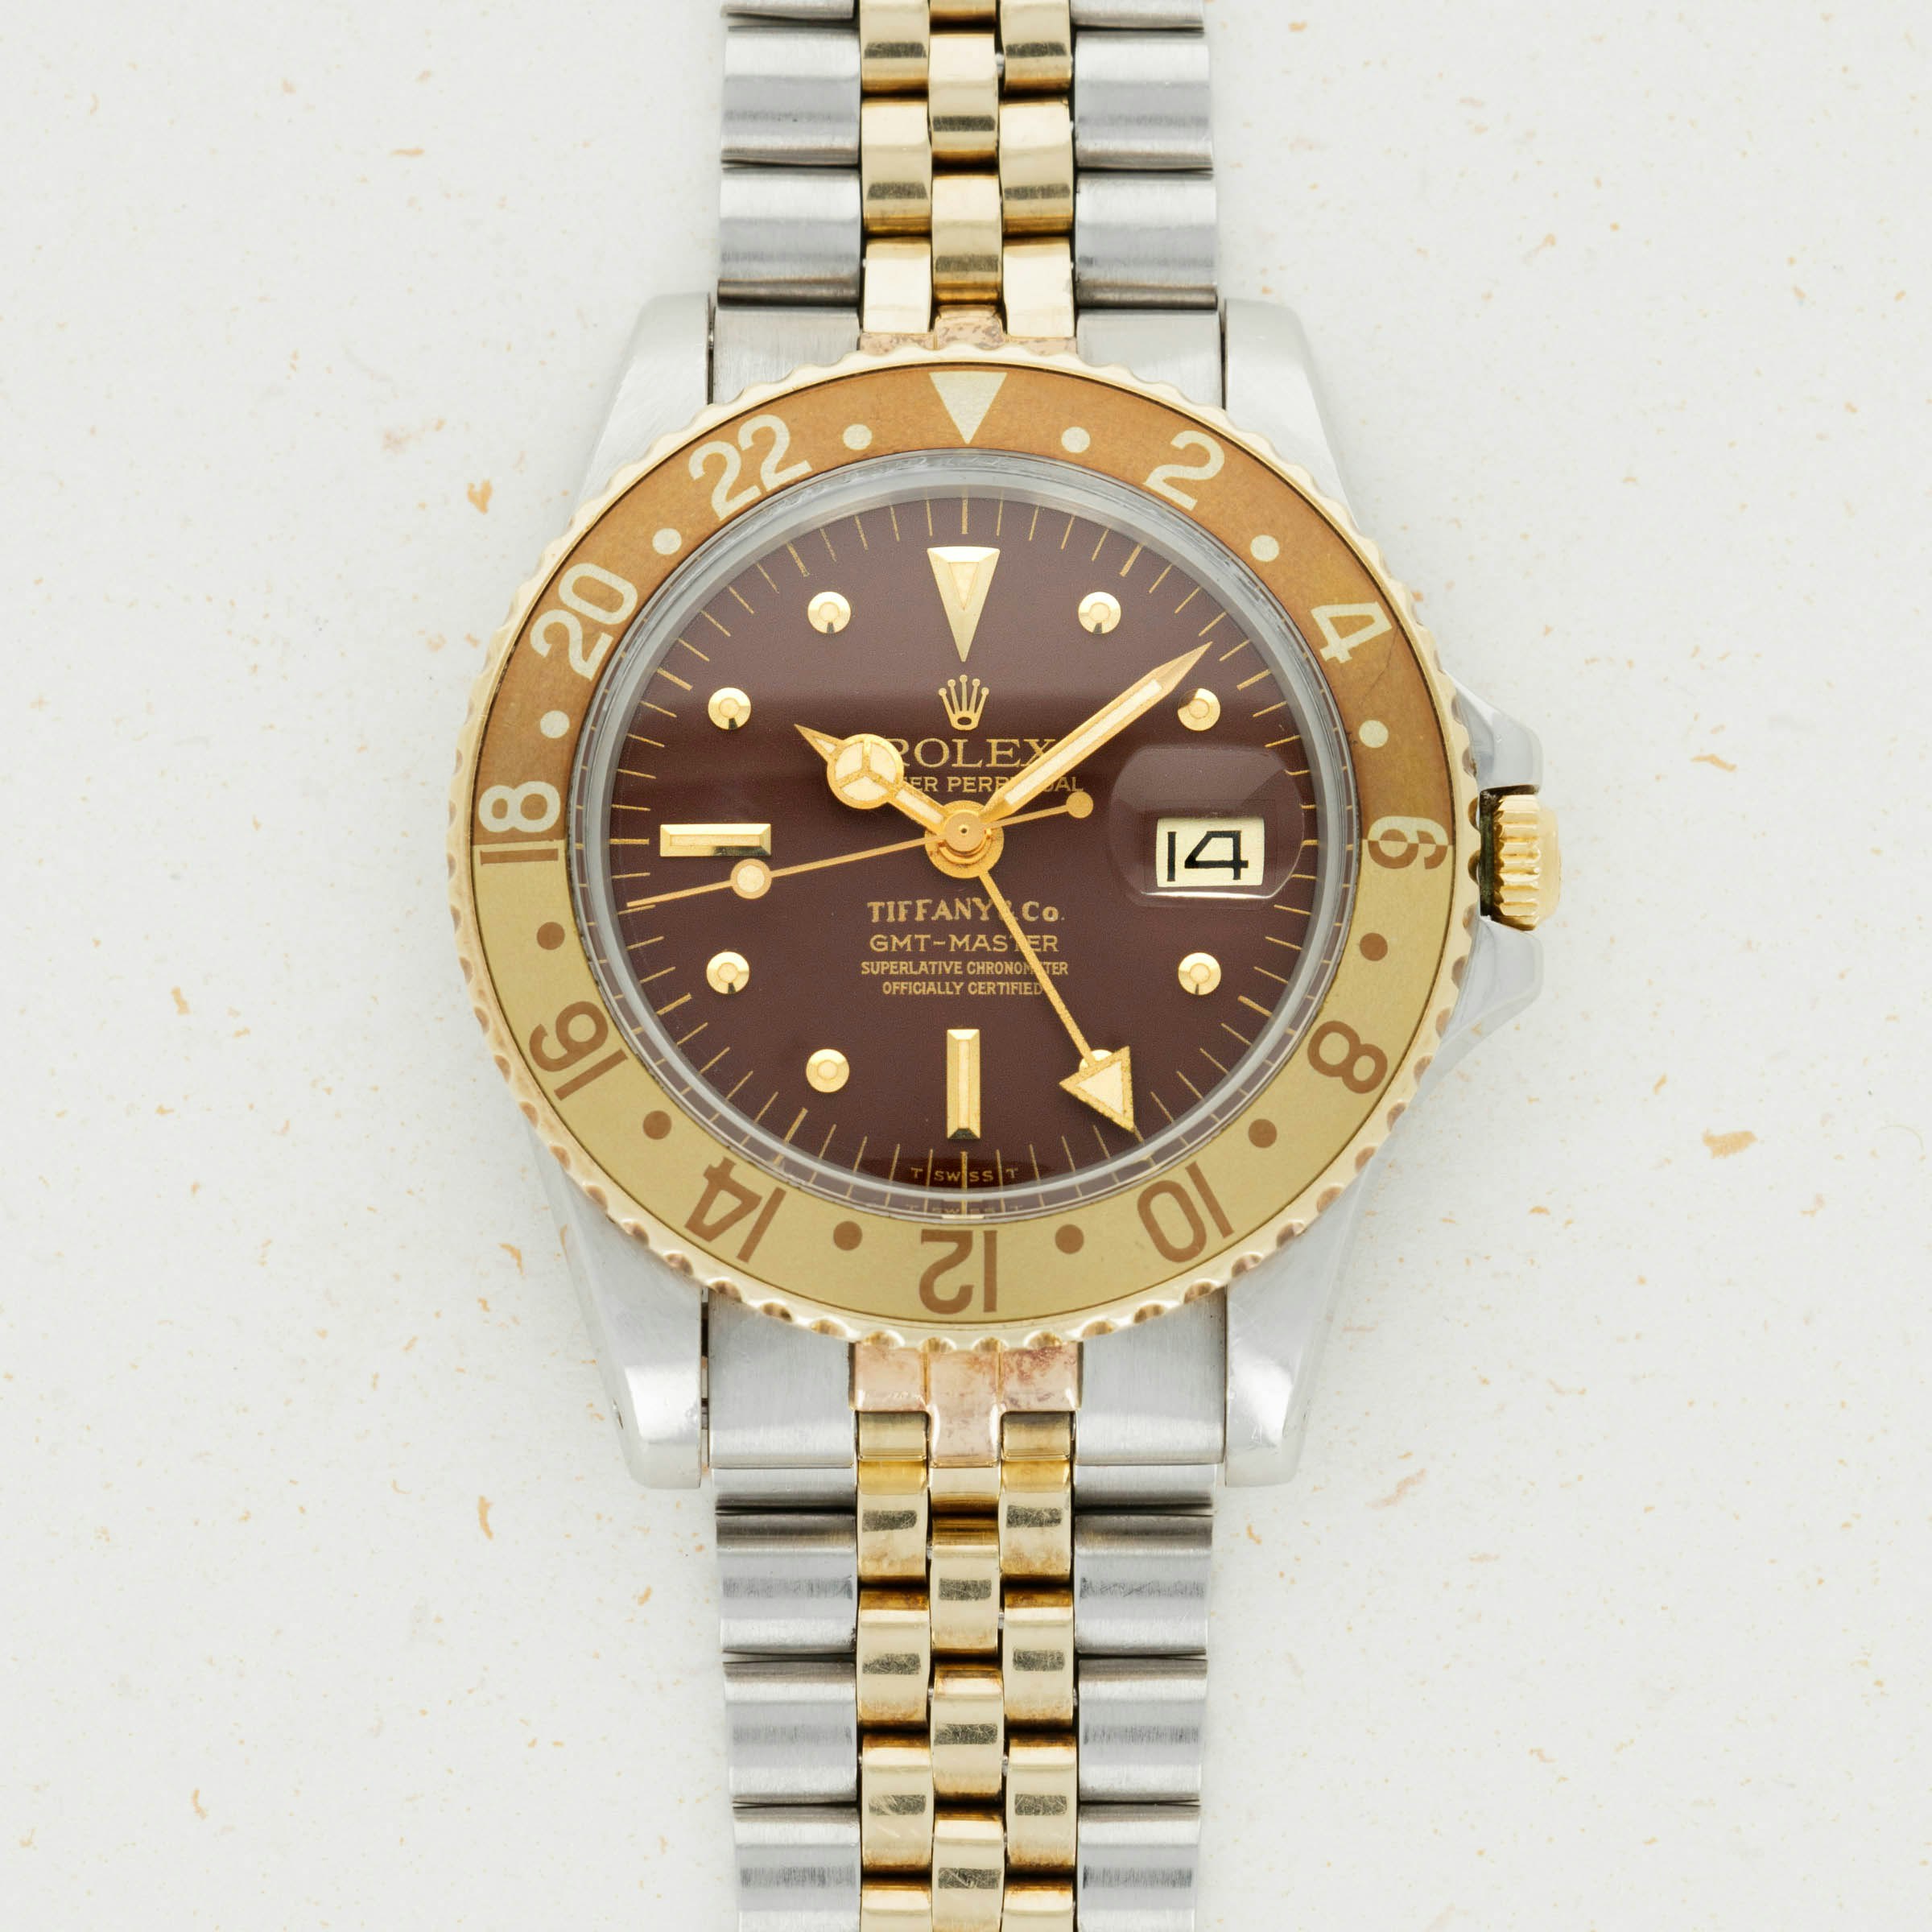 Thumbnail for Rolex GMT-Master Tiffany & Co. 1675 Two Tone